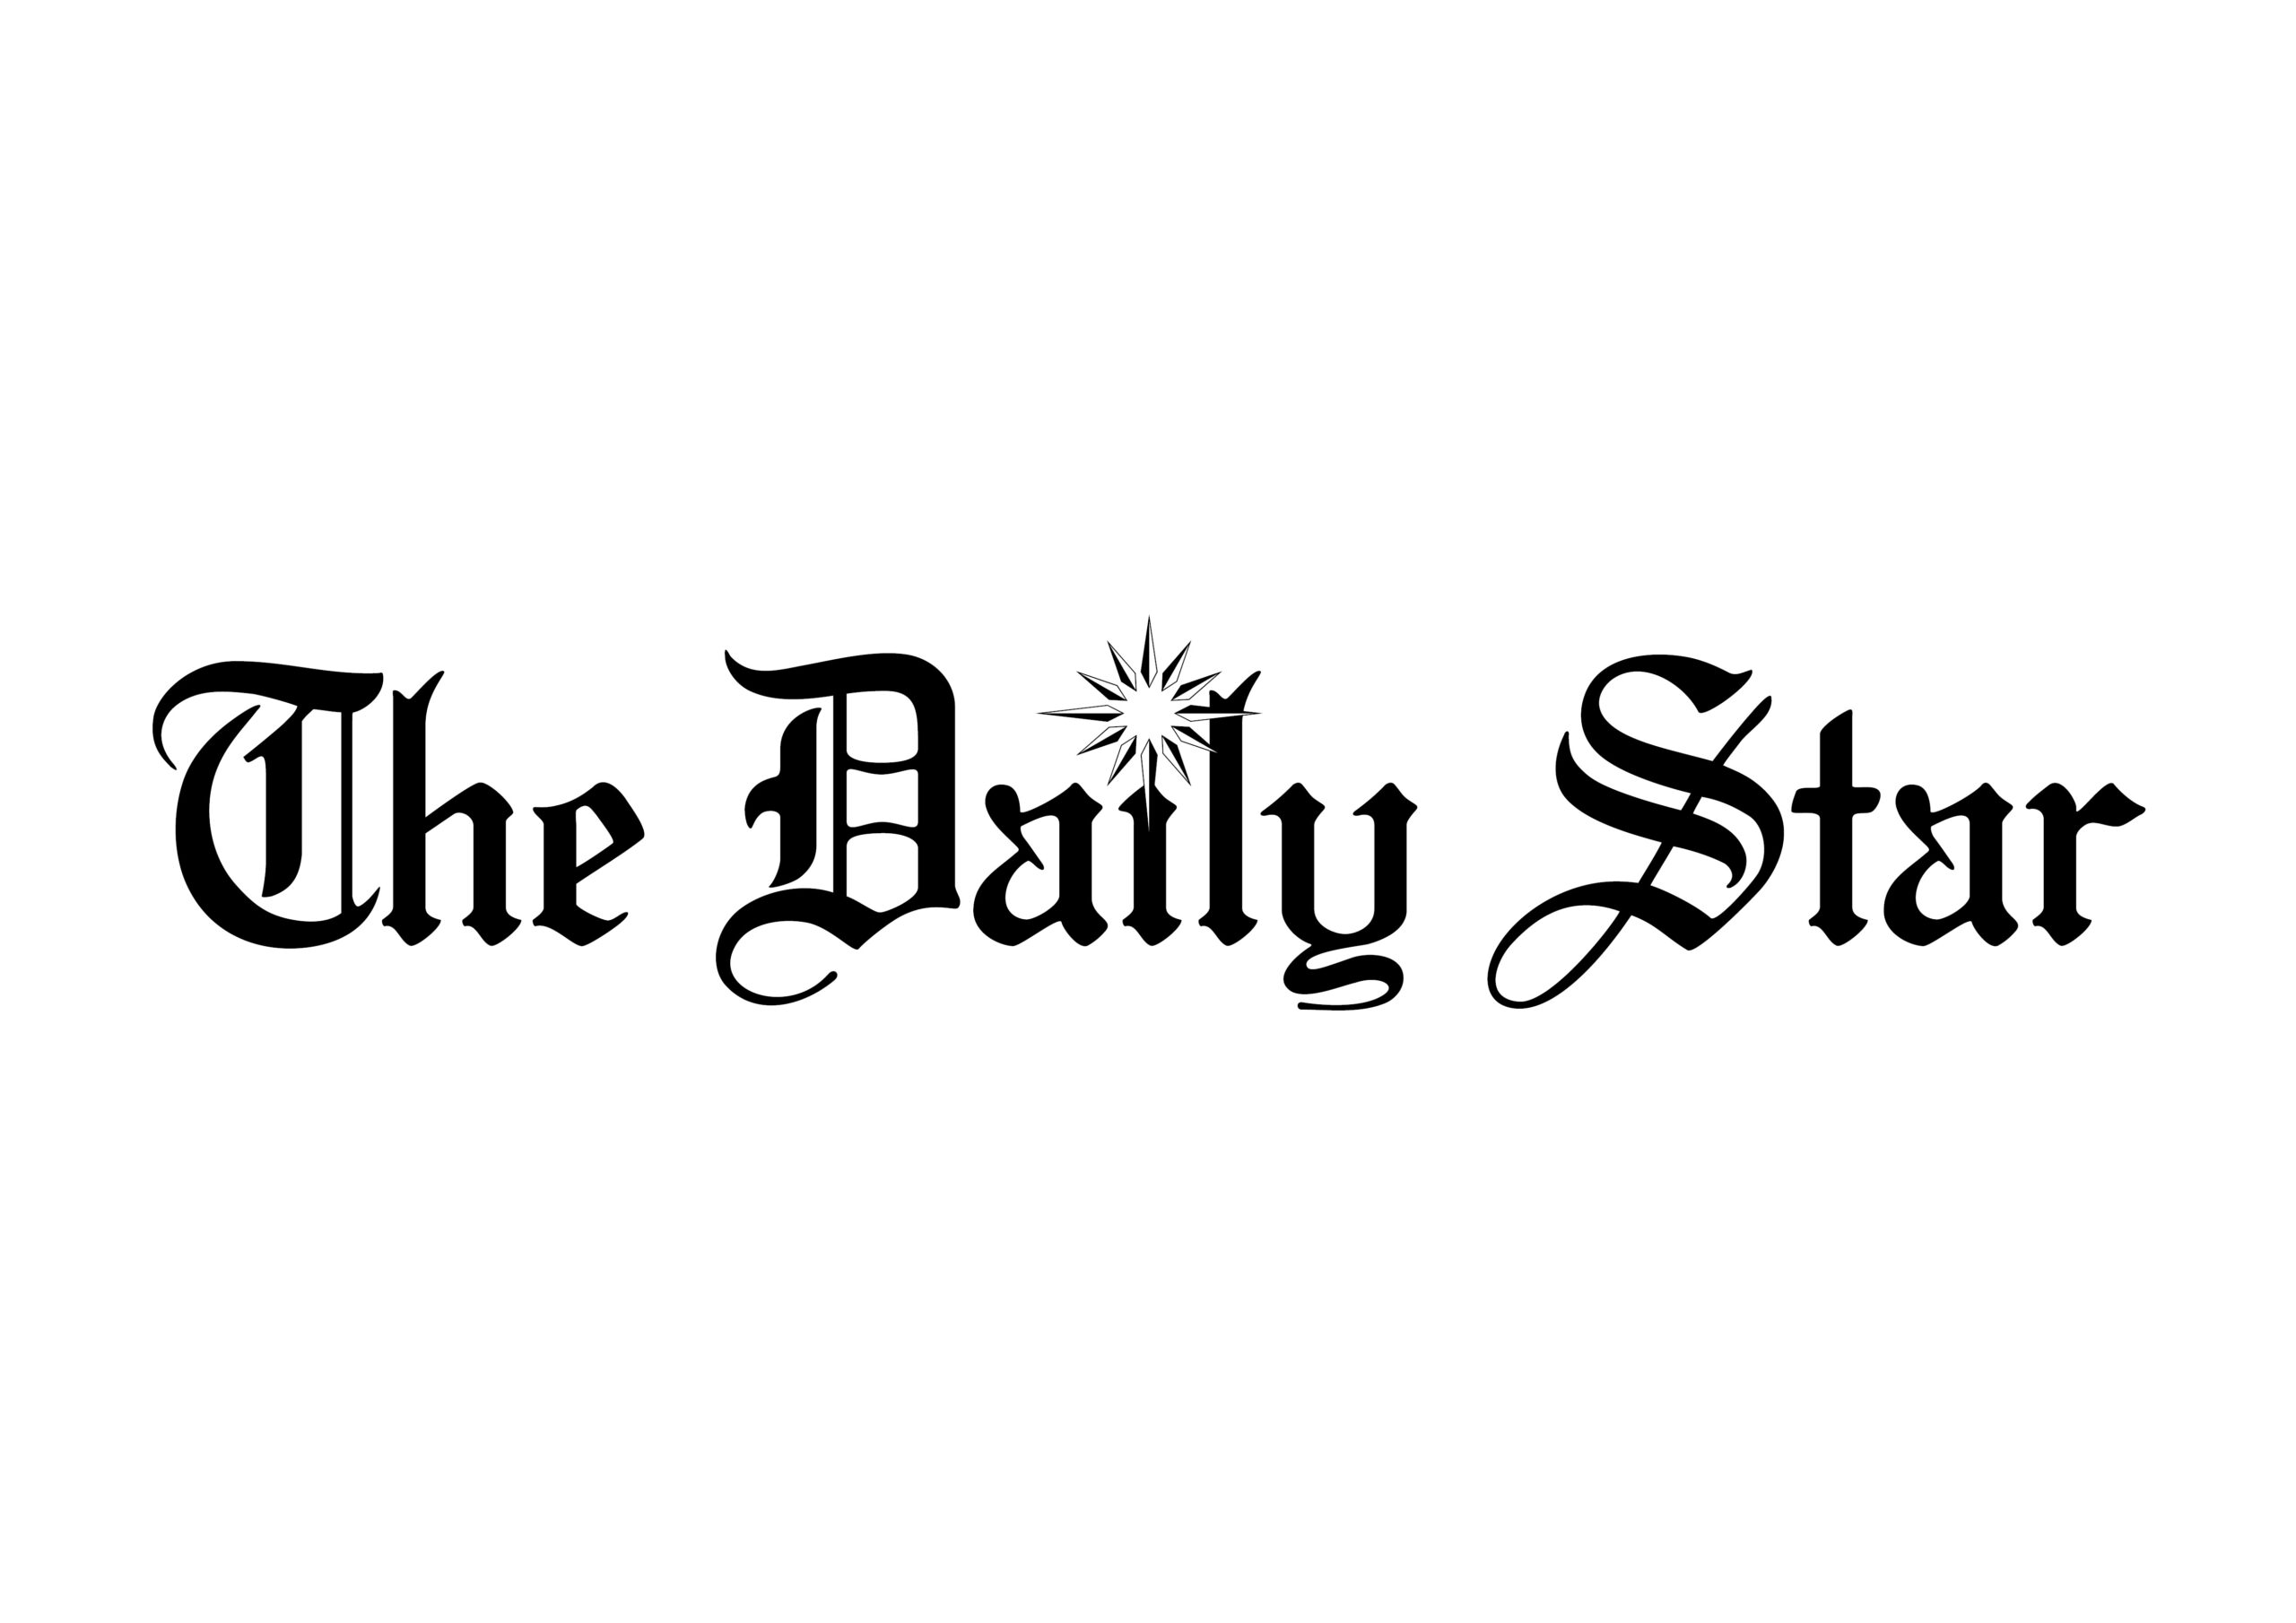 The Daily Star logo.